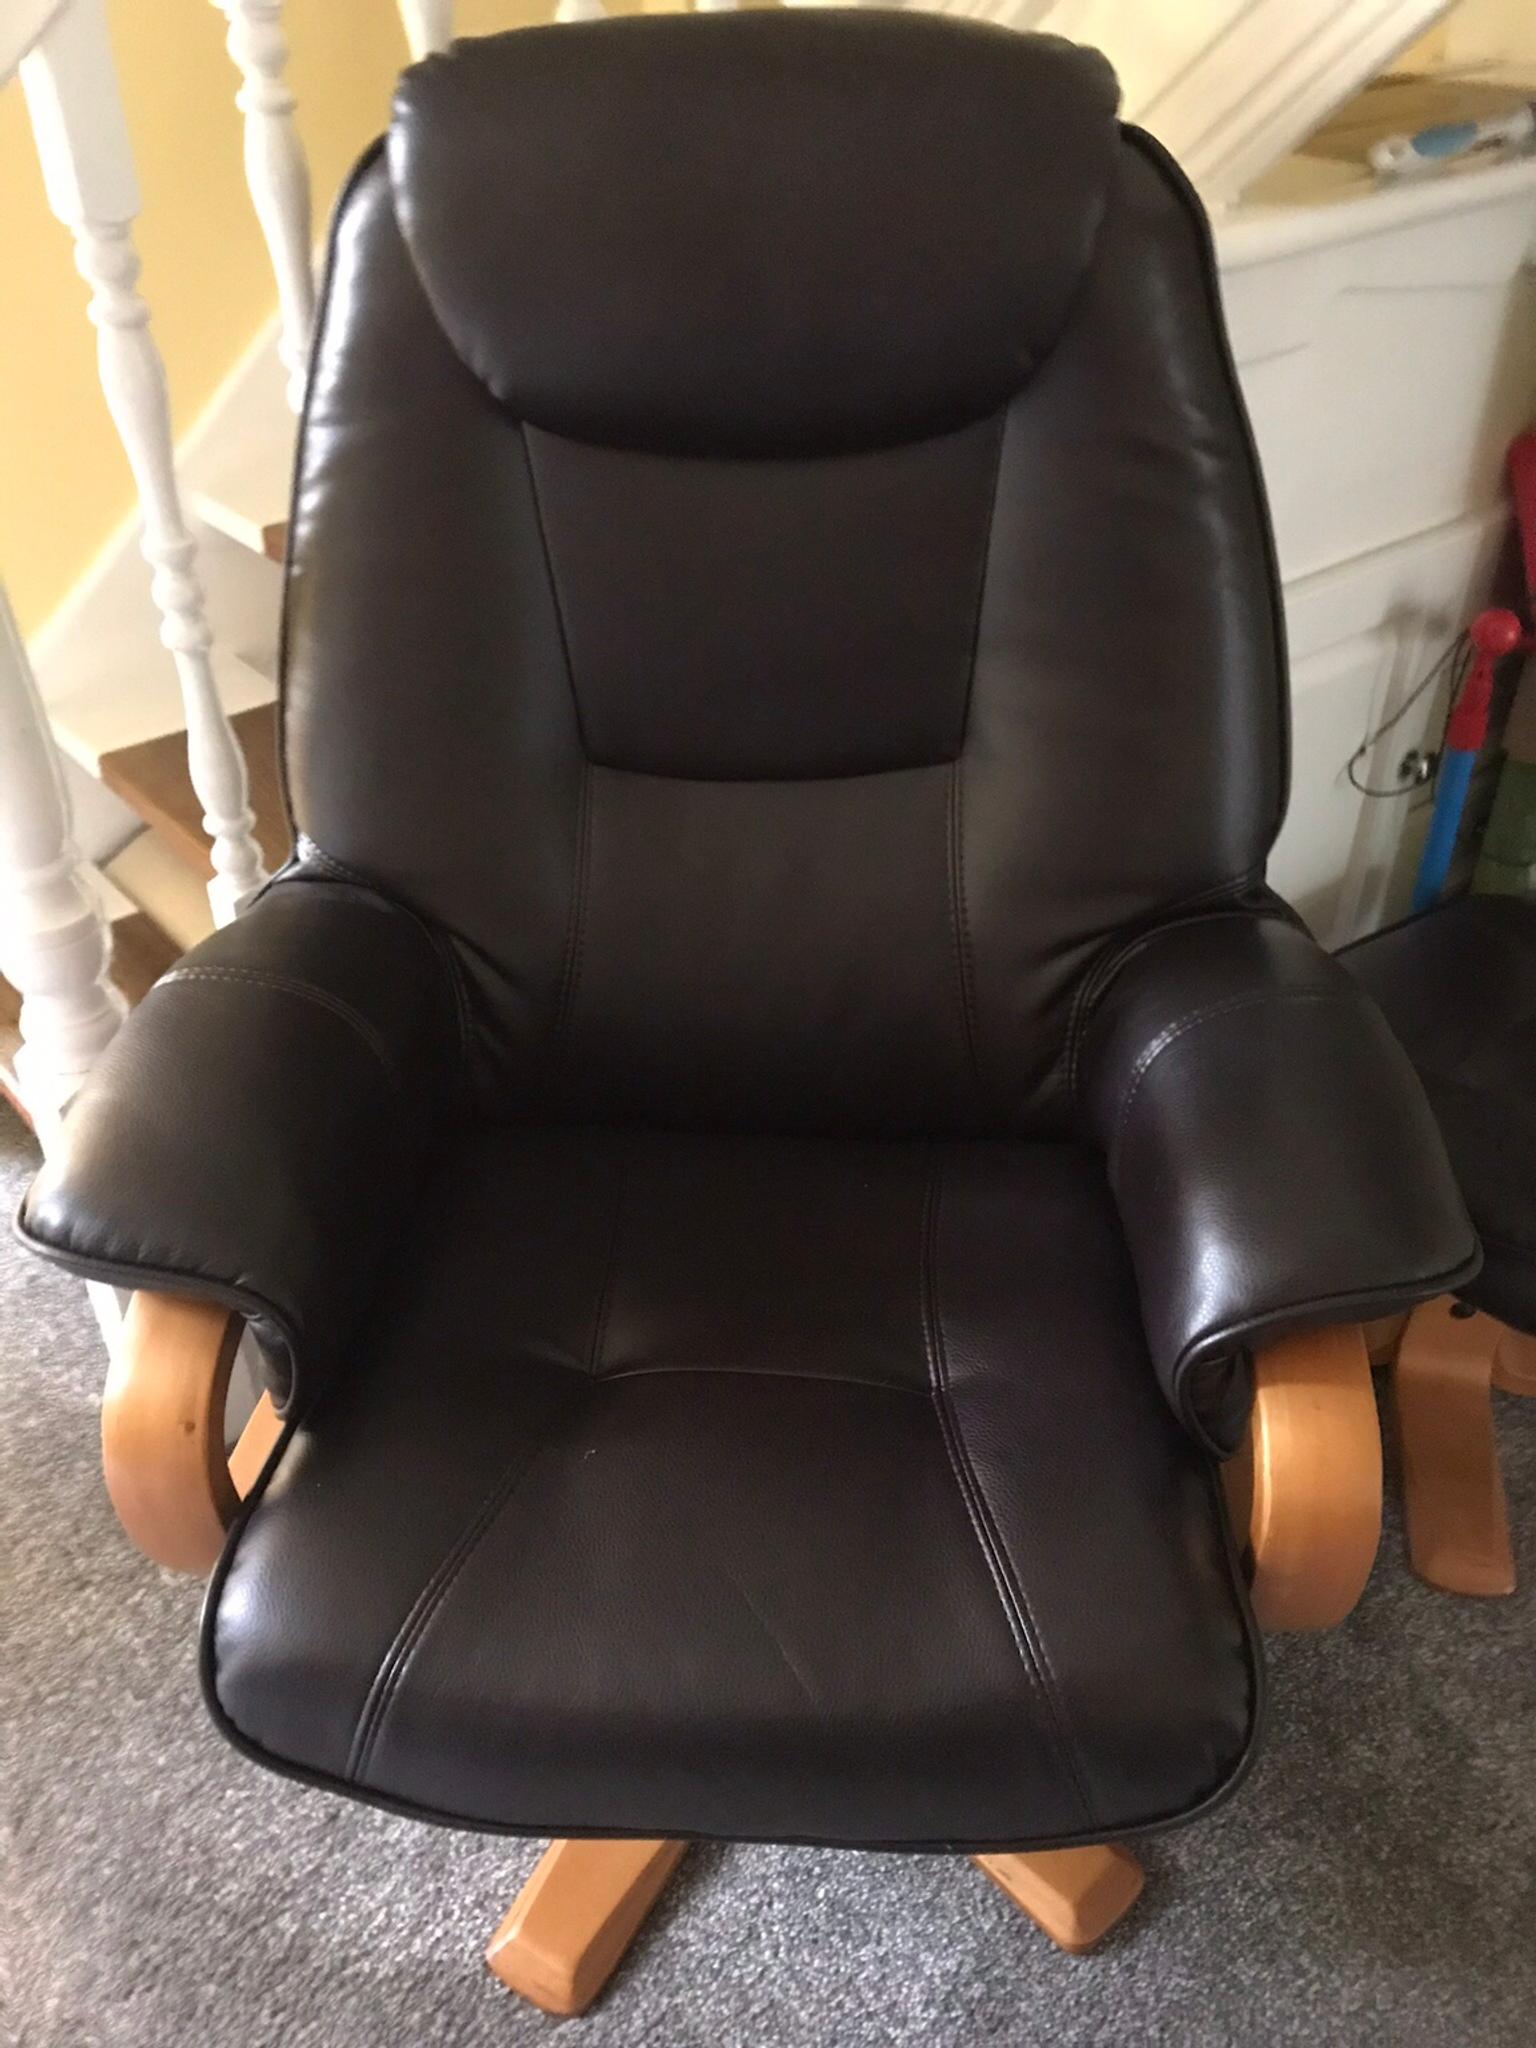 Bjorn Reclining Chair And Foot Stool In Salford For 175 00 For